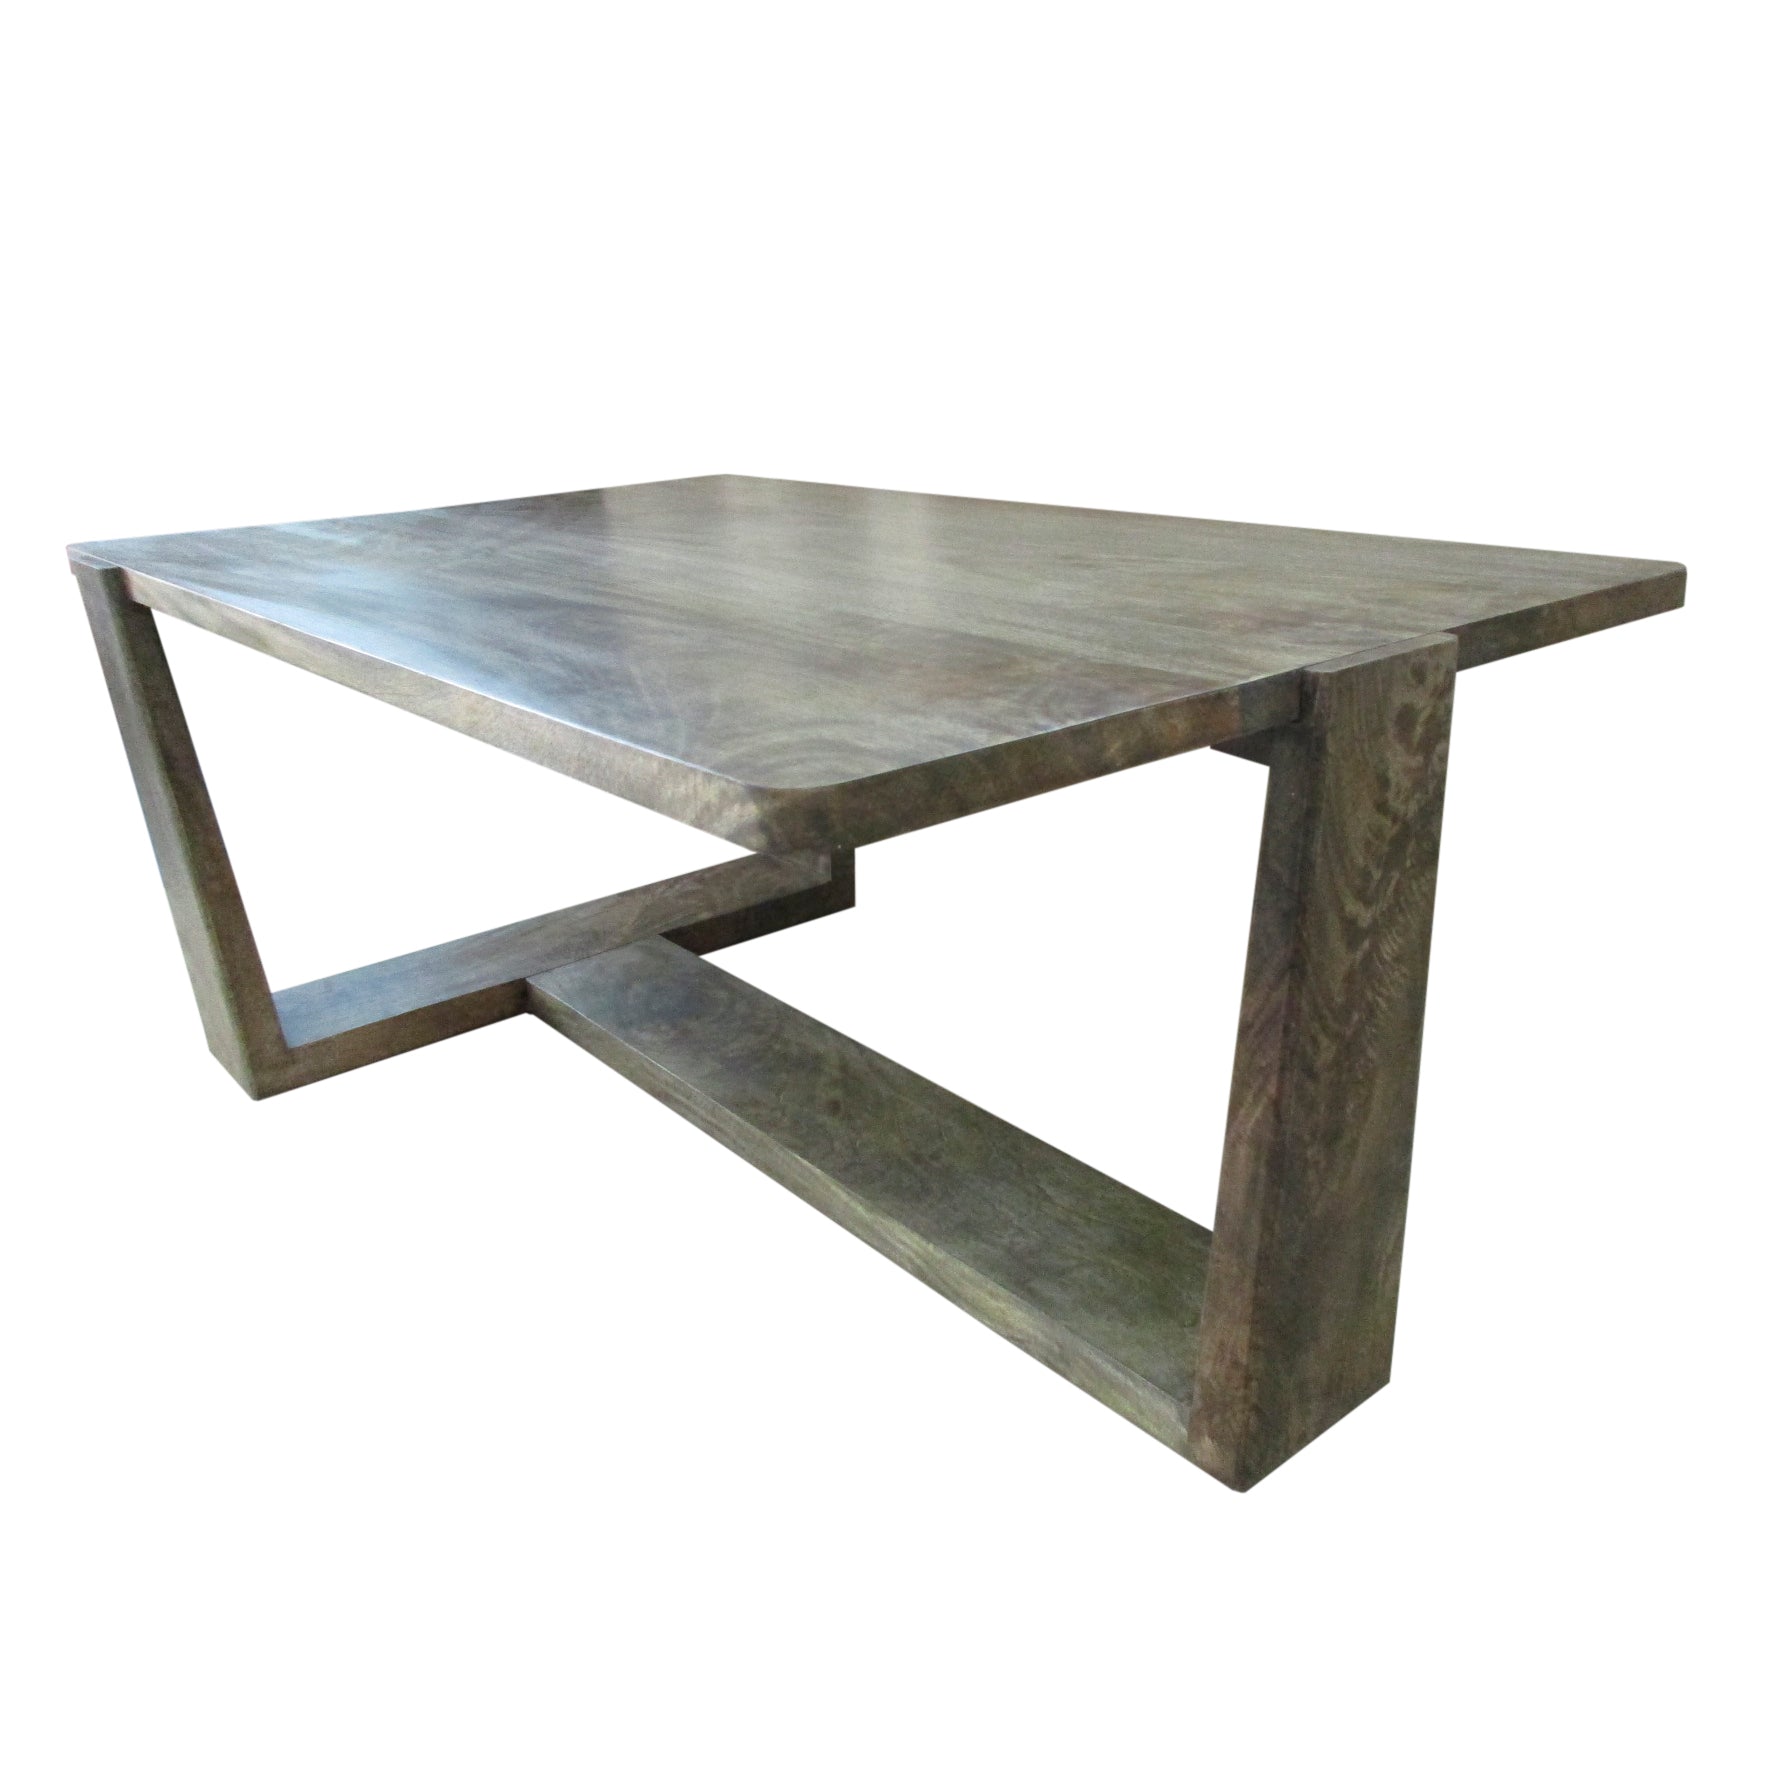 Crestview Collection Bengal Manor 50" x 30" x 20" Occasional Mango Wood Tri-Leg Rectangle Cocktail Table